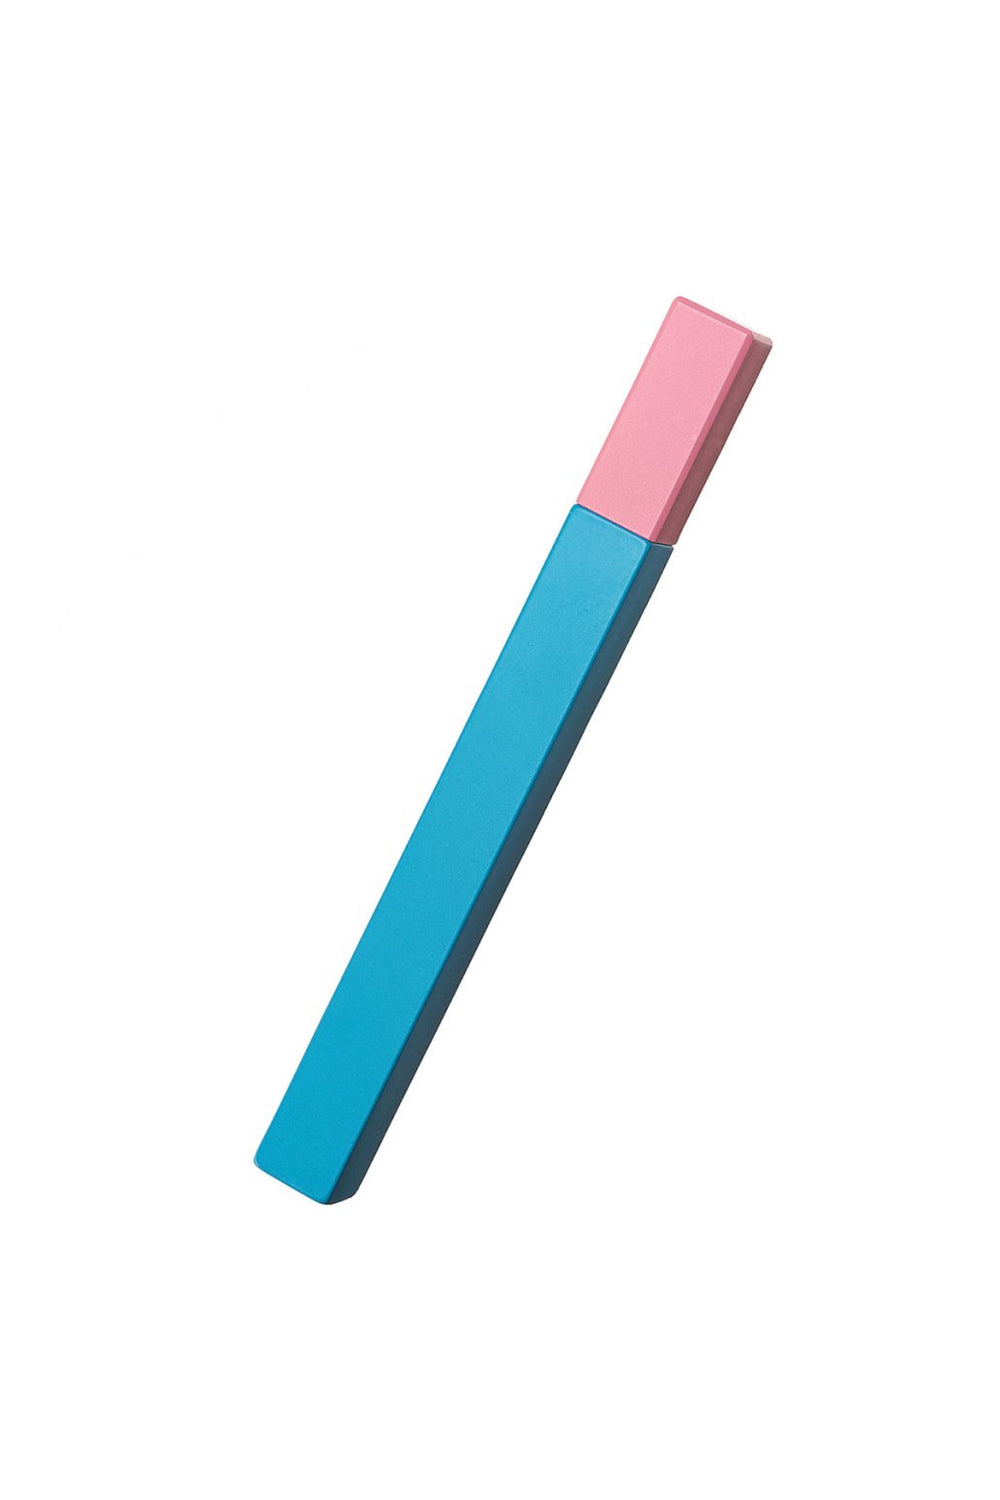 Turquoise + Pink Queue Lighter